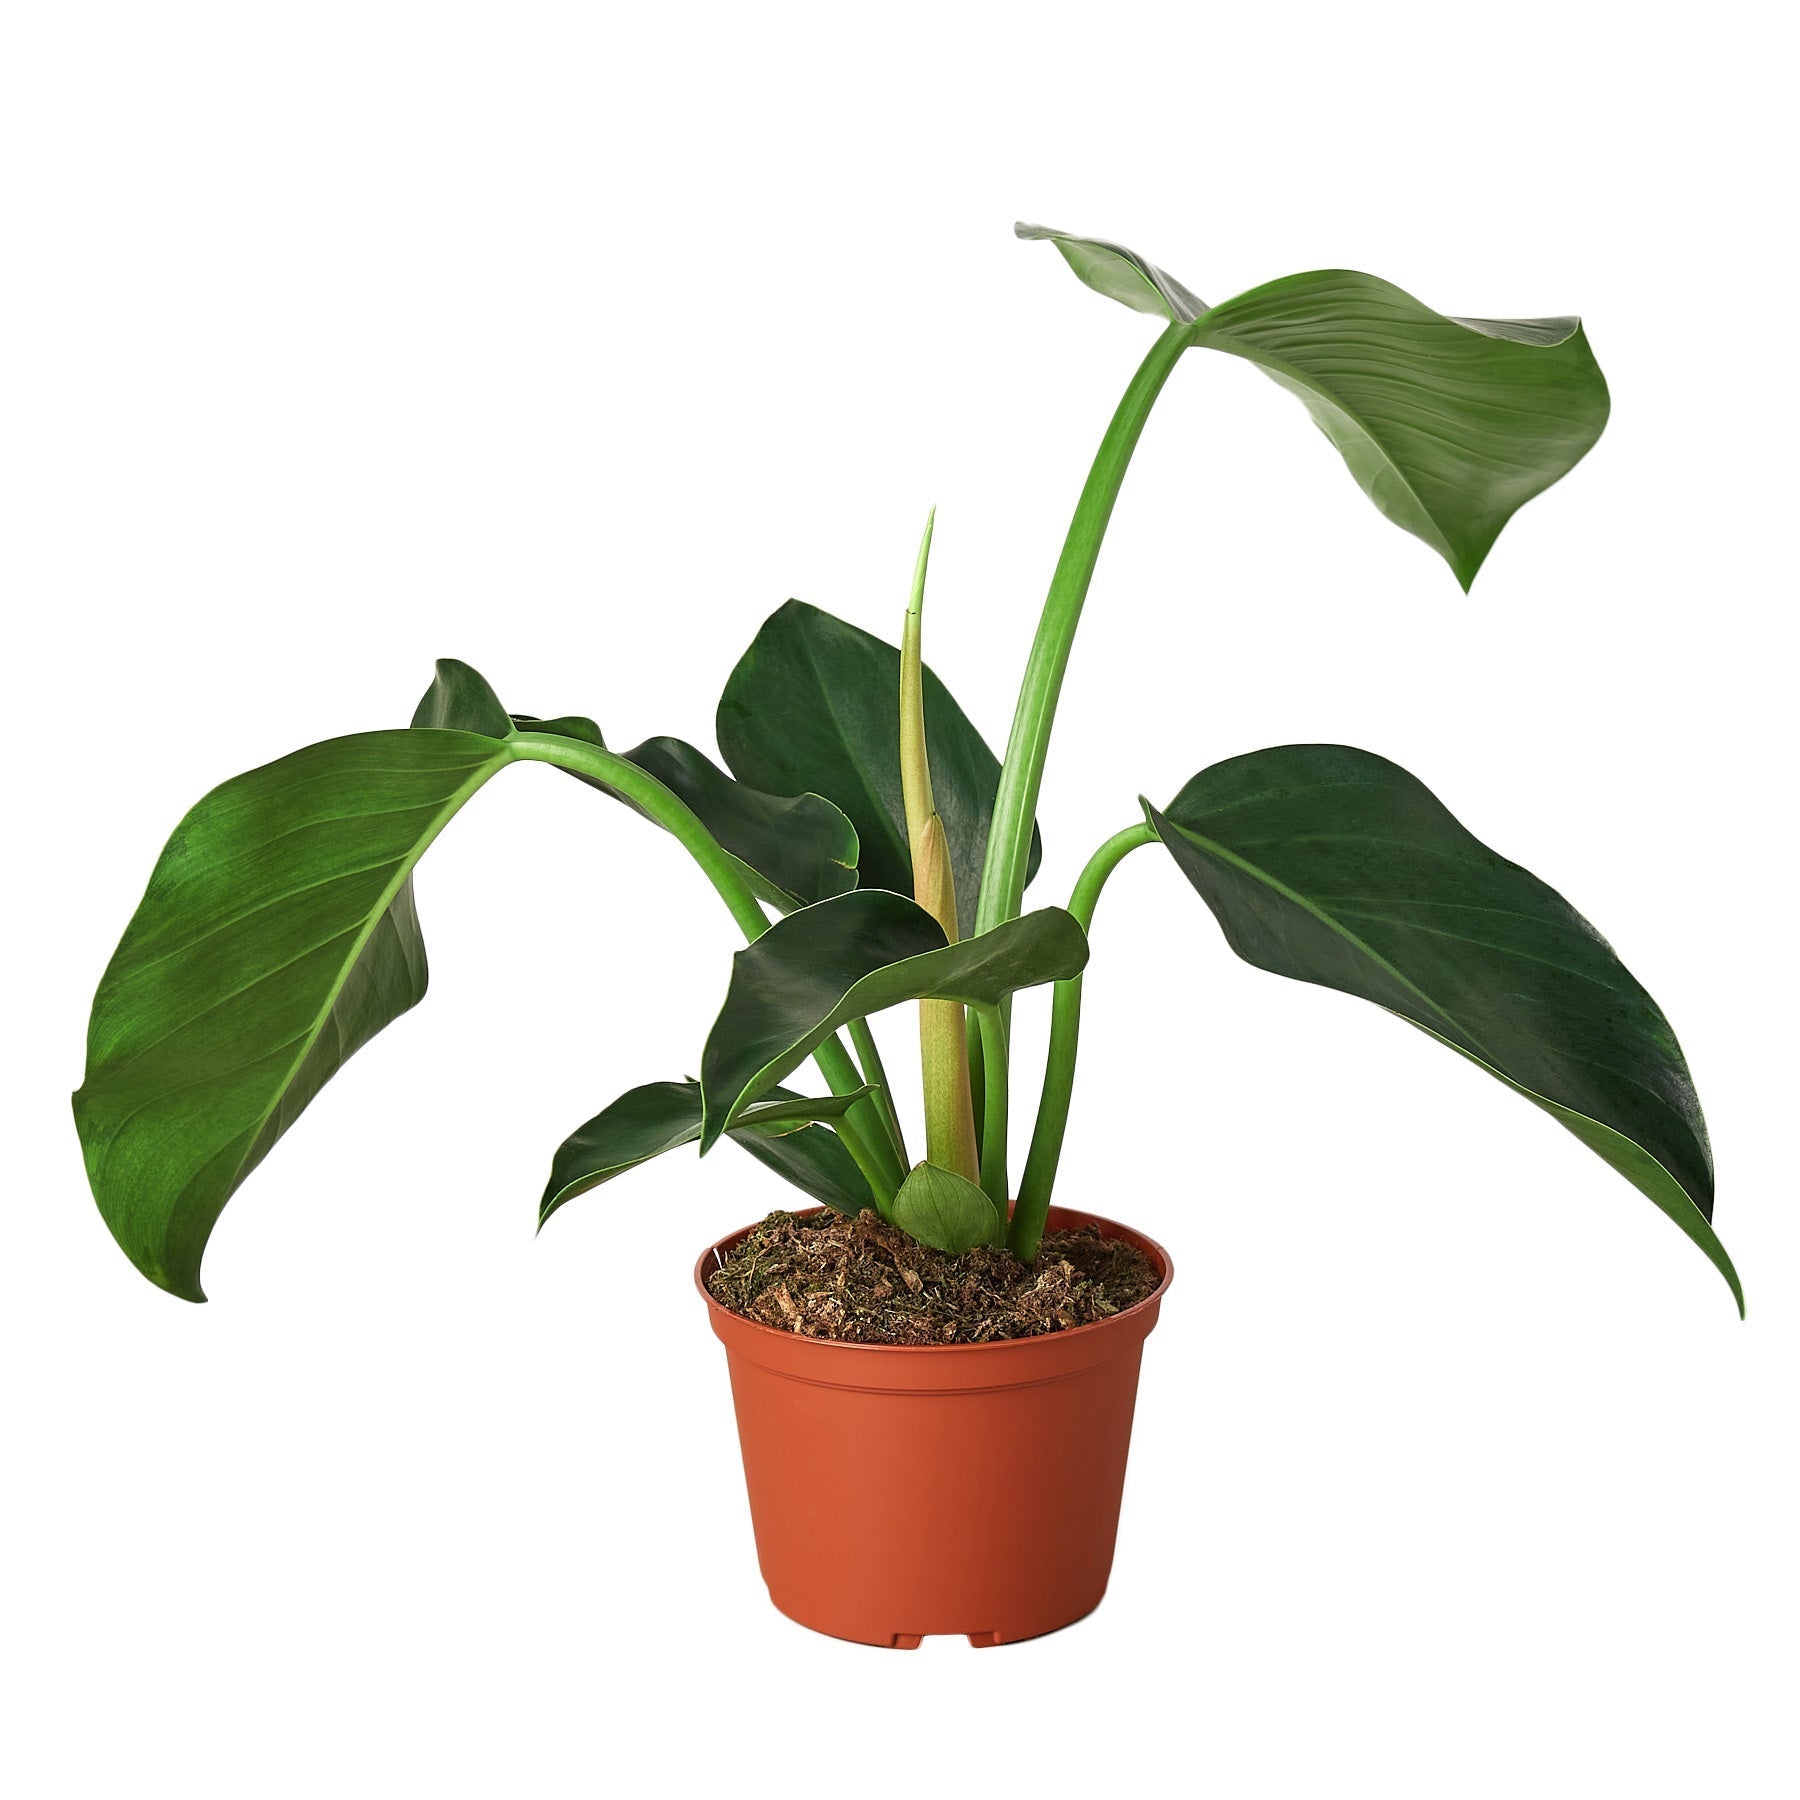 Philodendron 'Congo Green' - 4" Pot - NURSERY POT ONLY - One Beleaf Away Plant Studio